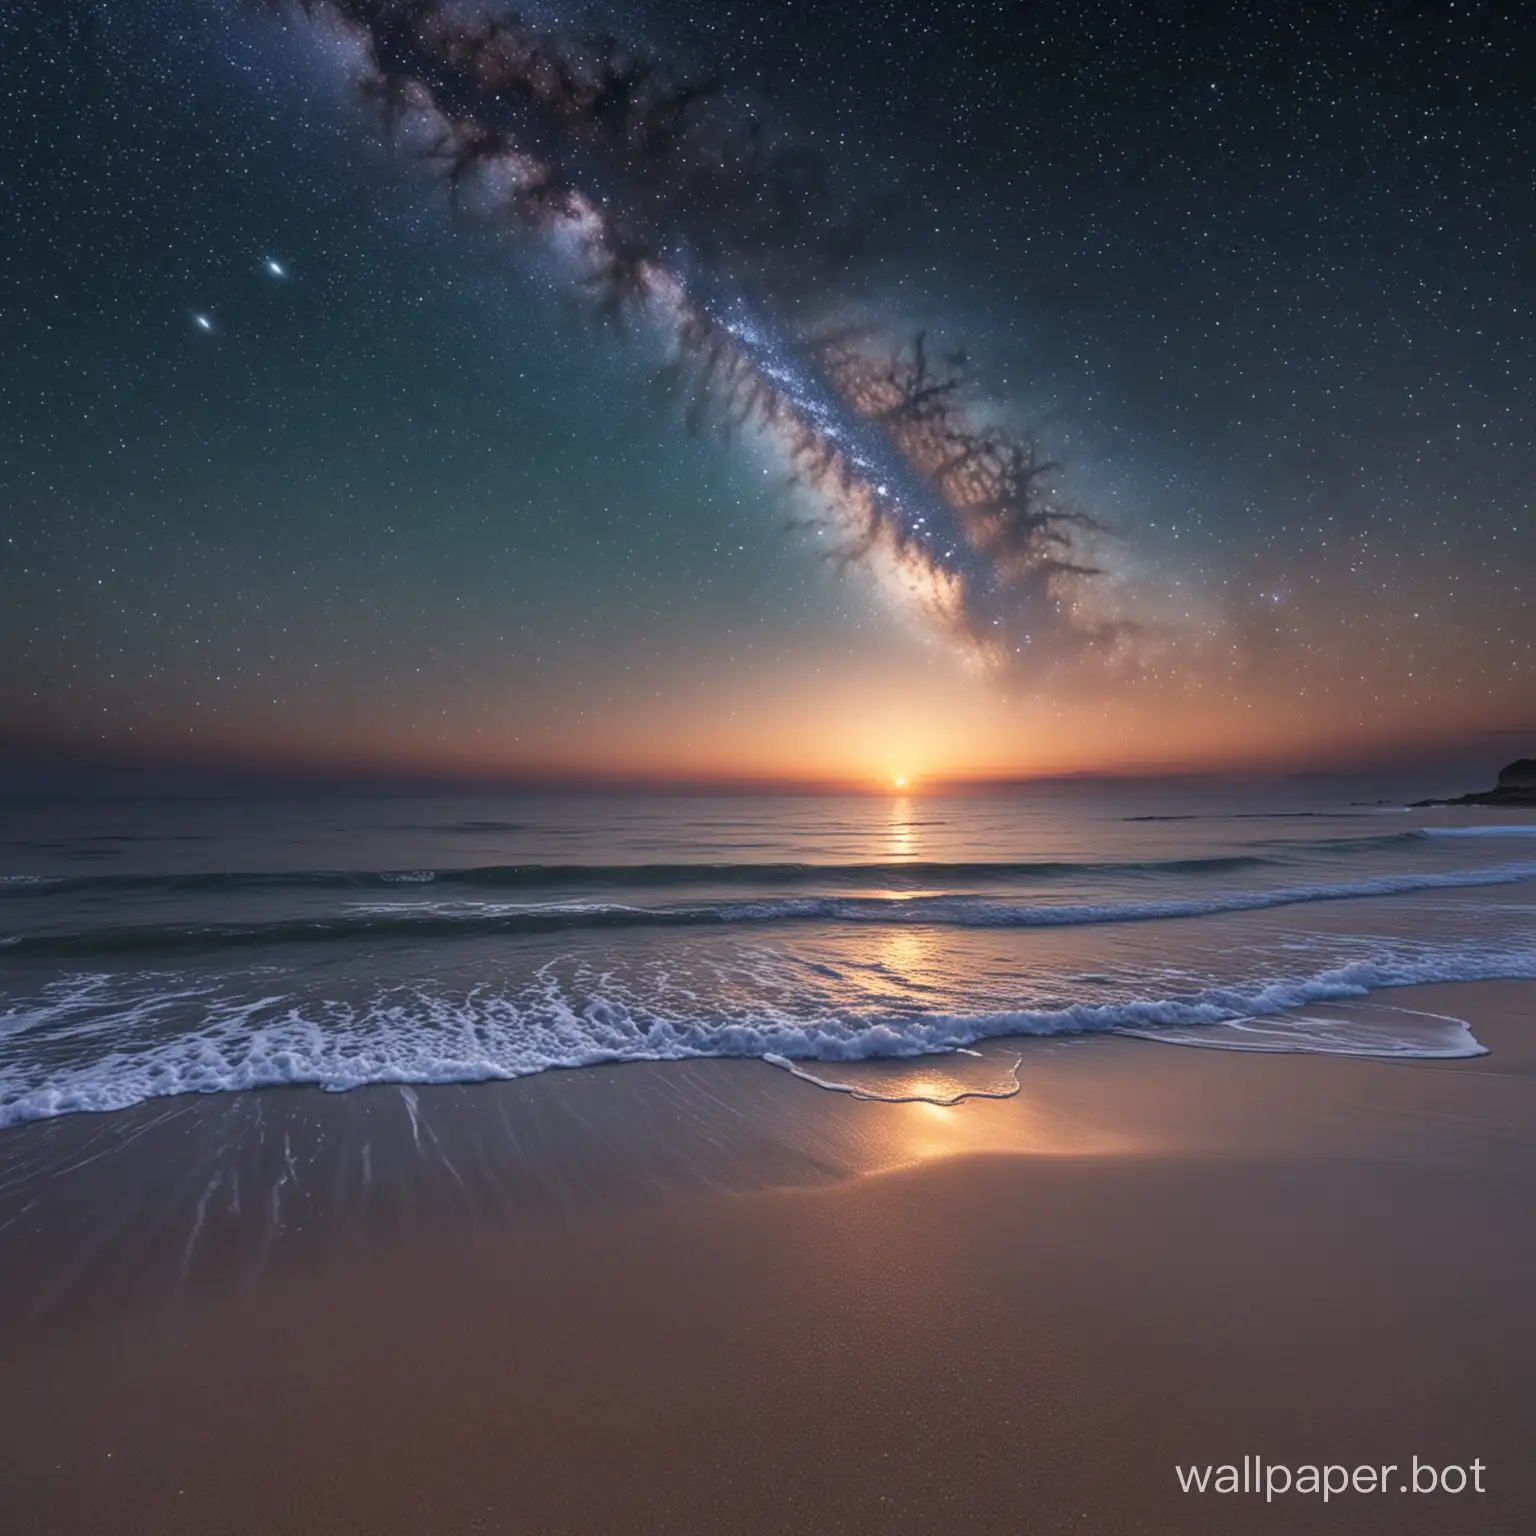 Tranquil-Dawn-Beach-with-Celestial-Galaxy-and-Starry-Sky